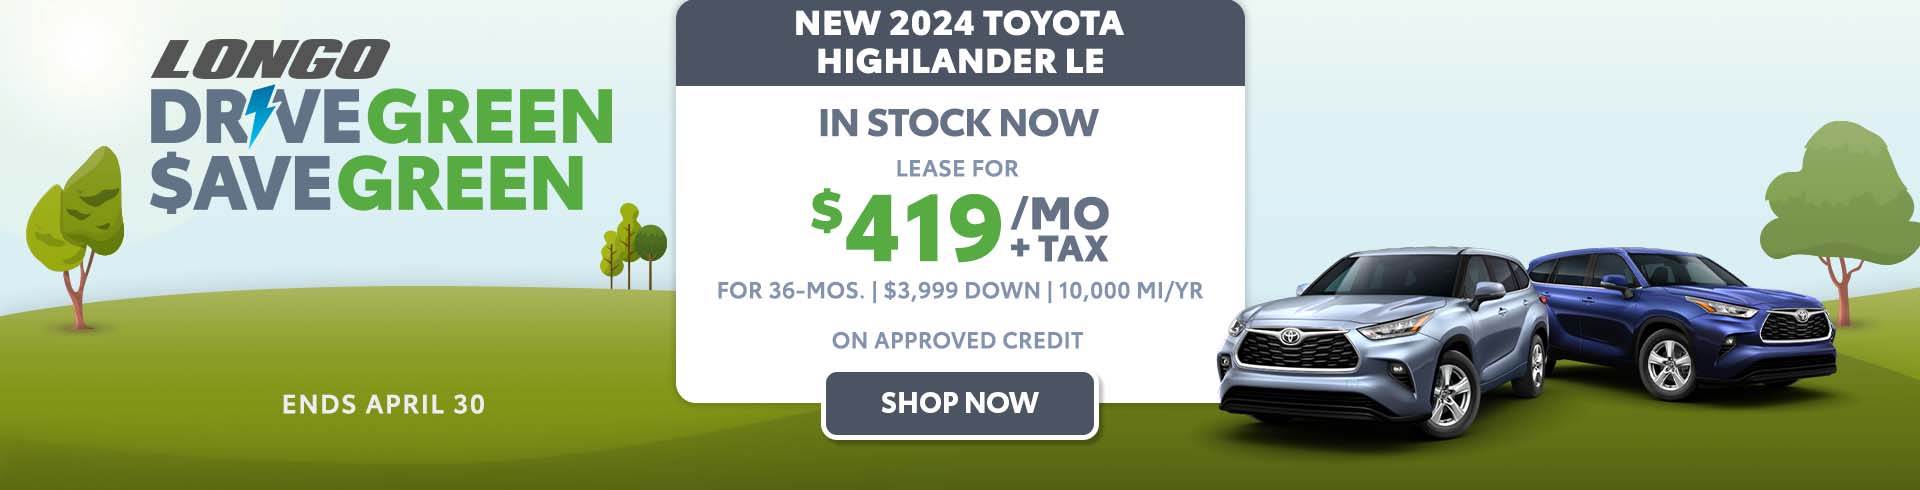 Lease a new 2024 Toyota Highlander LE for $419/mo + tax